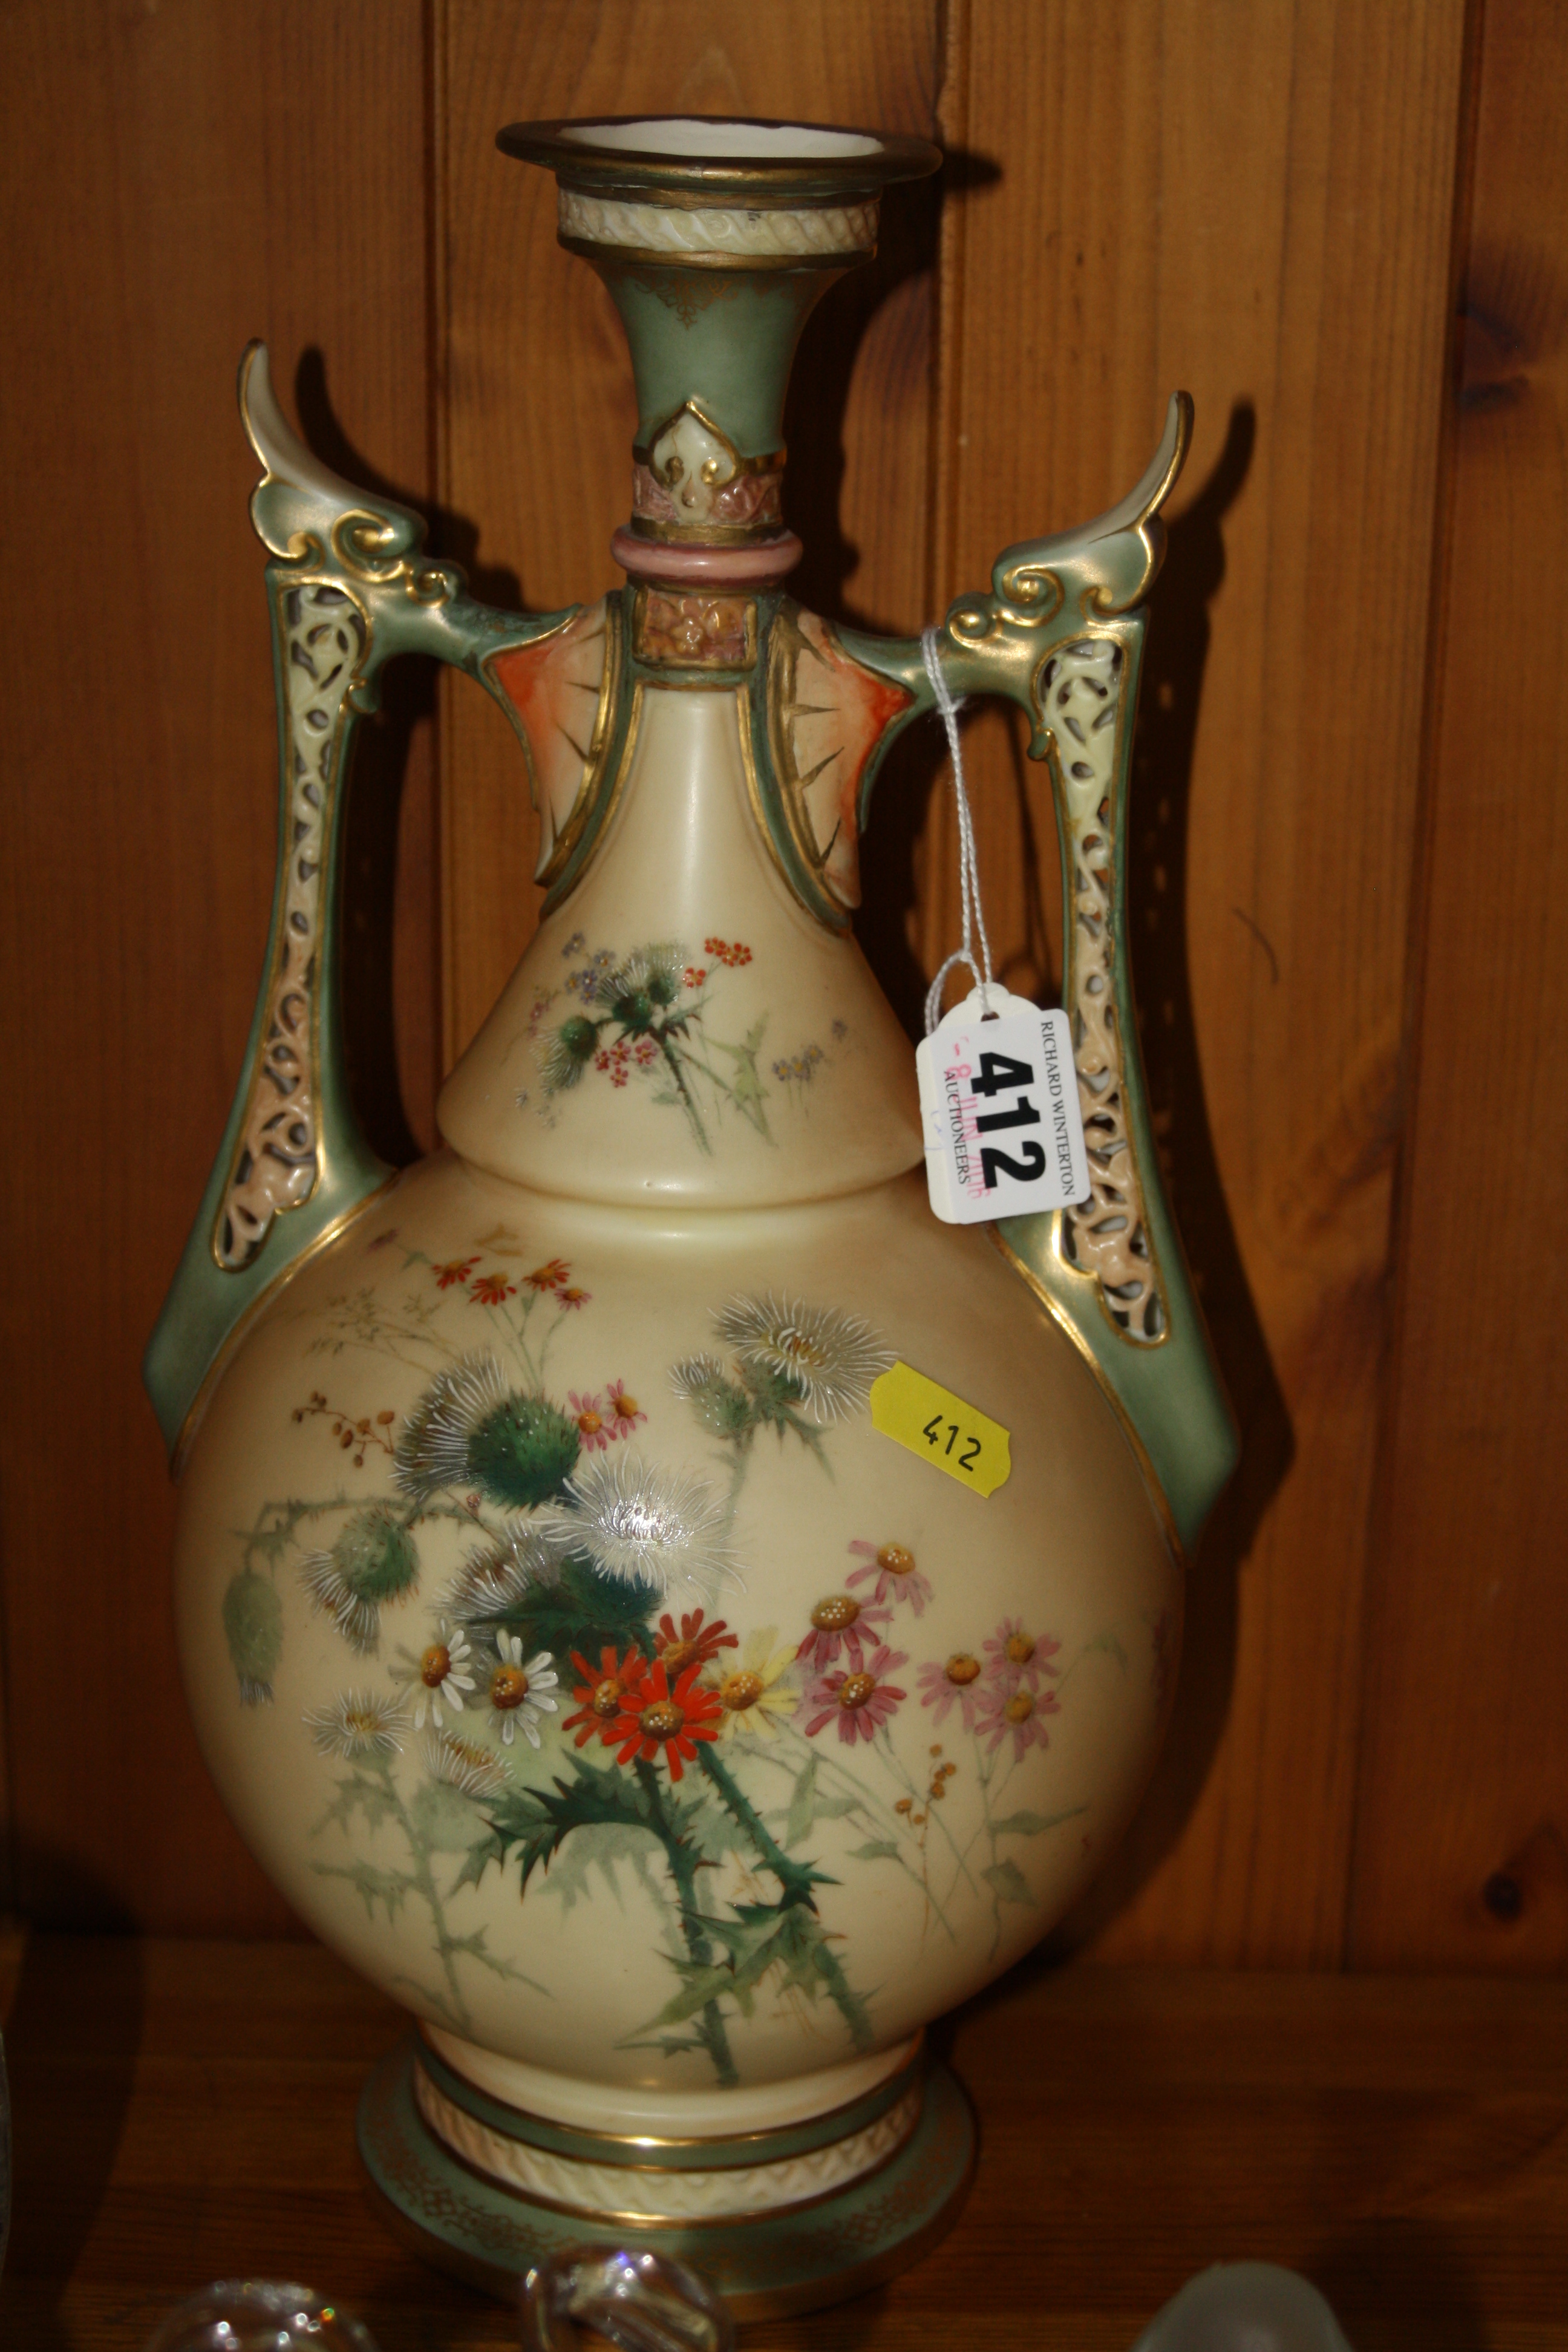 A ROYAL WORCESTER PORCELAIN TWIN HANDLED VASE, decorated with thistles and flowers on cream ground